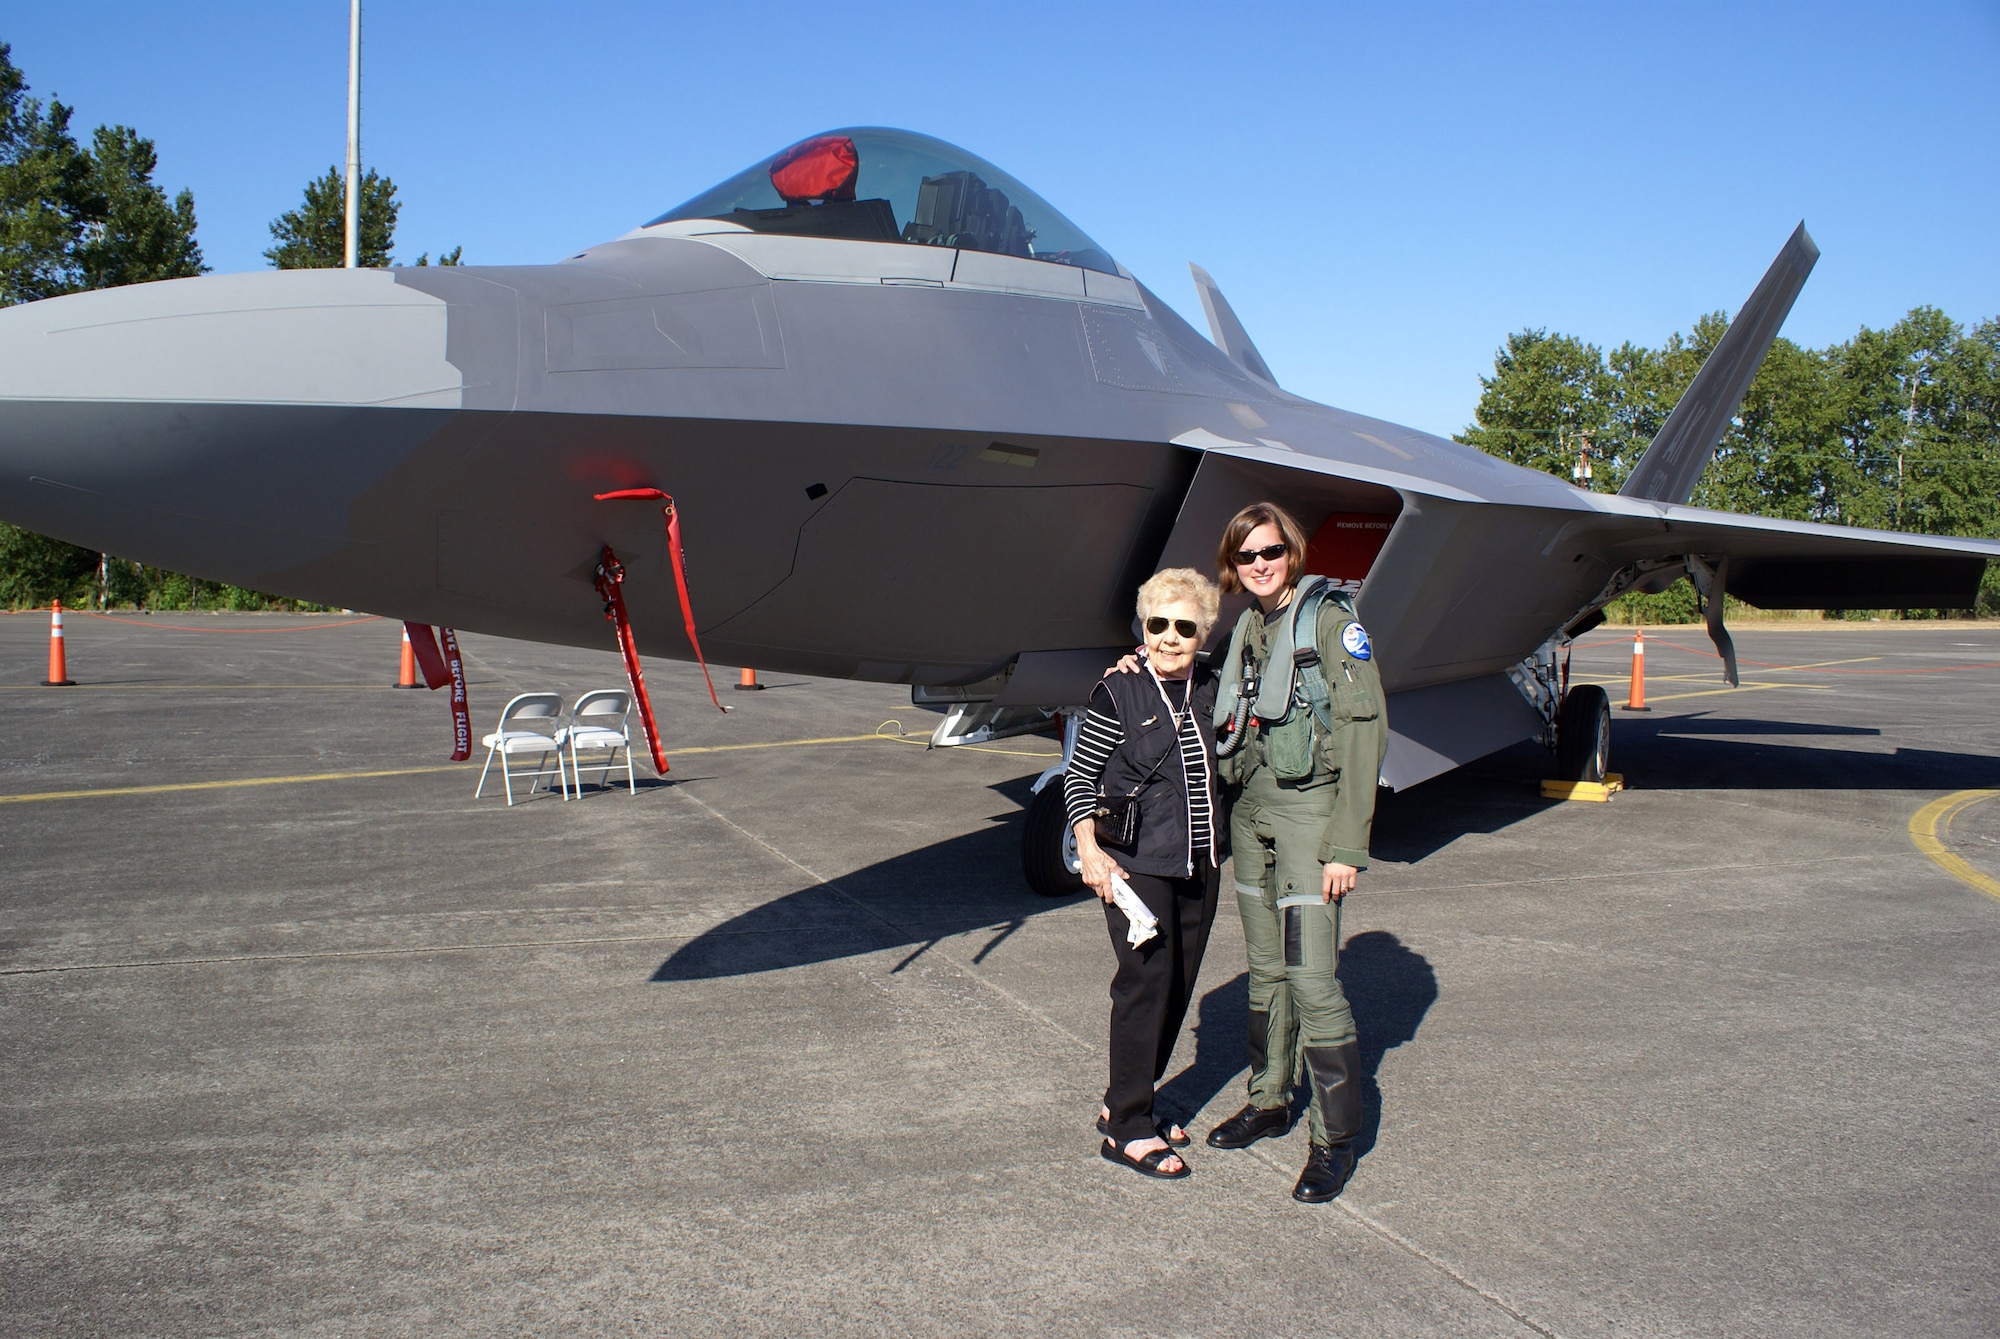 Dorothy Olsen meets with Capt. Jammie Jamieson during the July 20 airshow at McChord Air Force Base, Wash. Captain Jamieson, currently stationed at Elmendorf Air Force Base, Alaska, is the mobility flight commander for the 525th Fighter Squadron. She is the first operational and combat-ready female F-22 Raptor pilot. Ms. Olsen is a former member of the a former Women Airforce Service Pilots. (U.S. Air Force photo/Staff Sgt. Eric Burks) 
